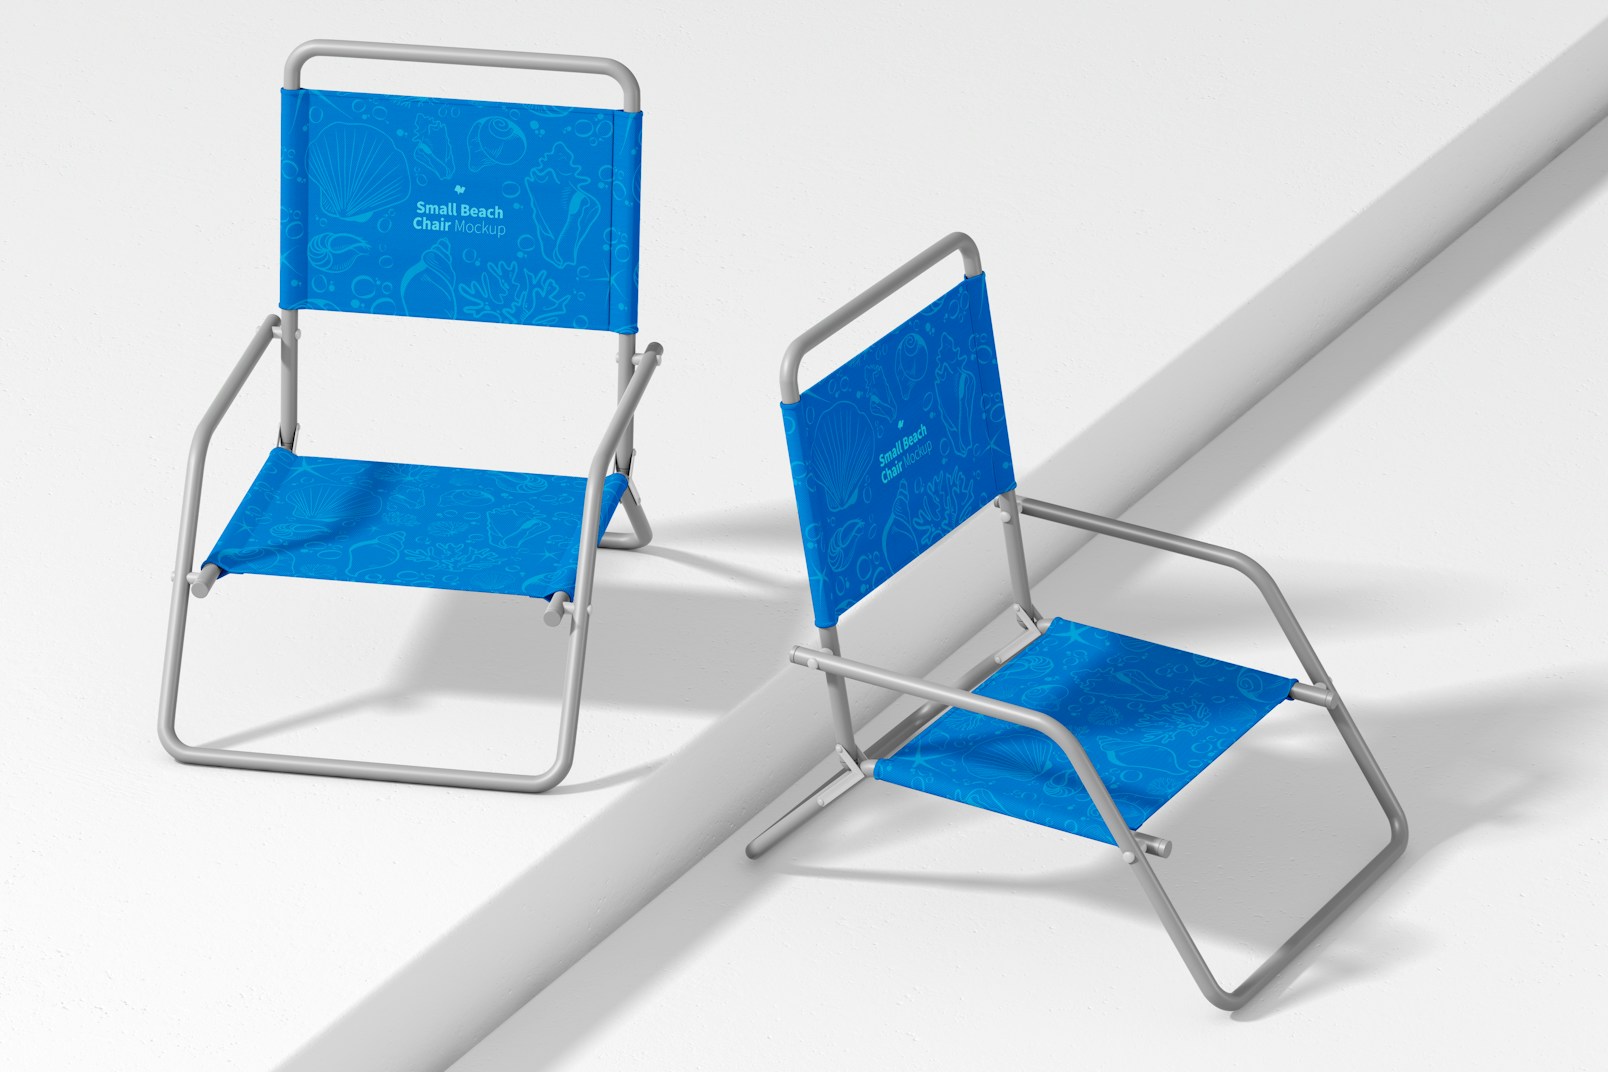 Small Beach Chairs Mockup, Up and Down